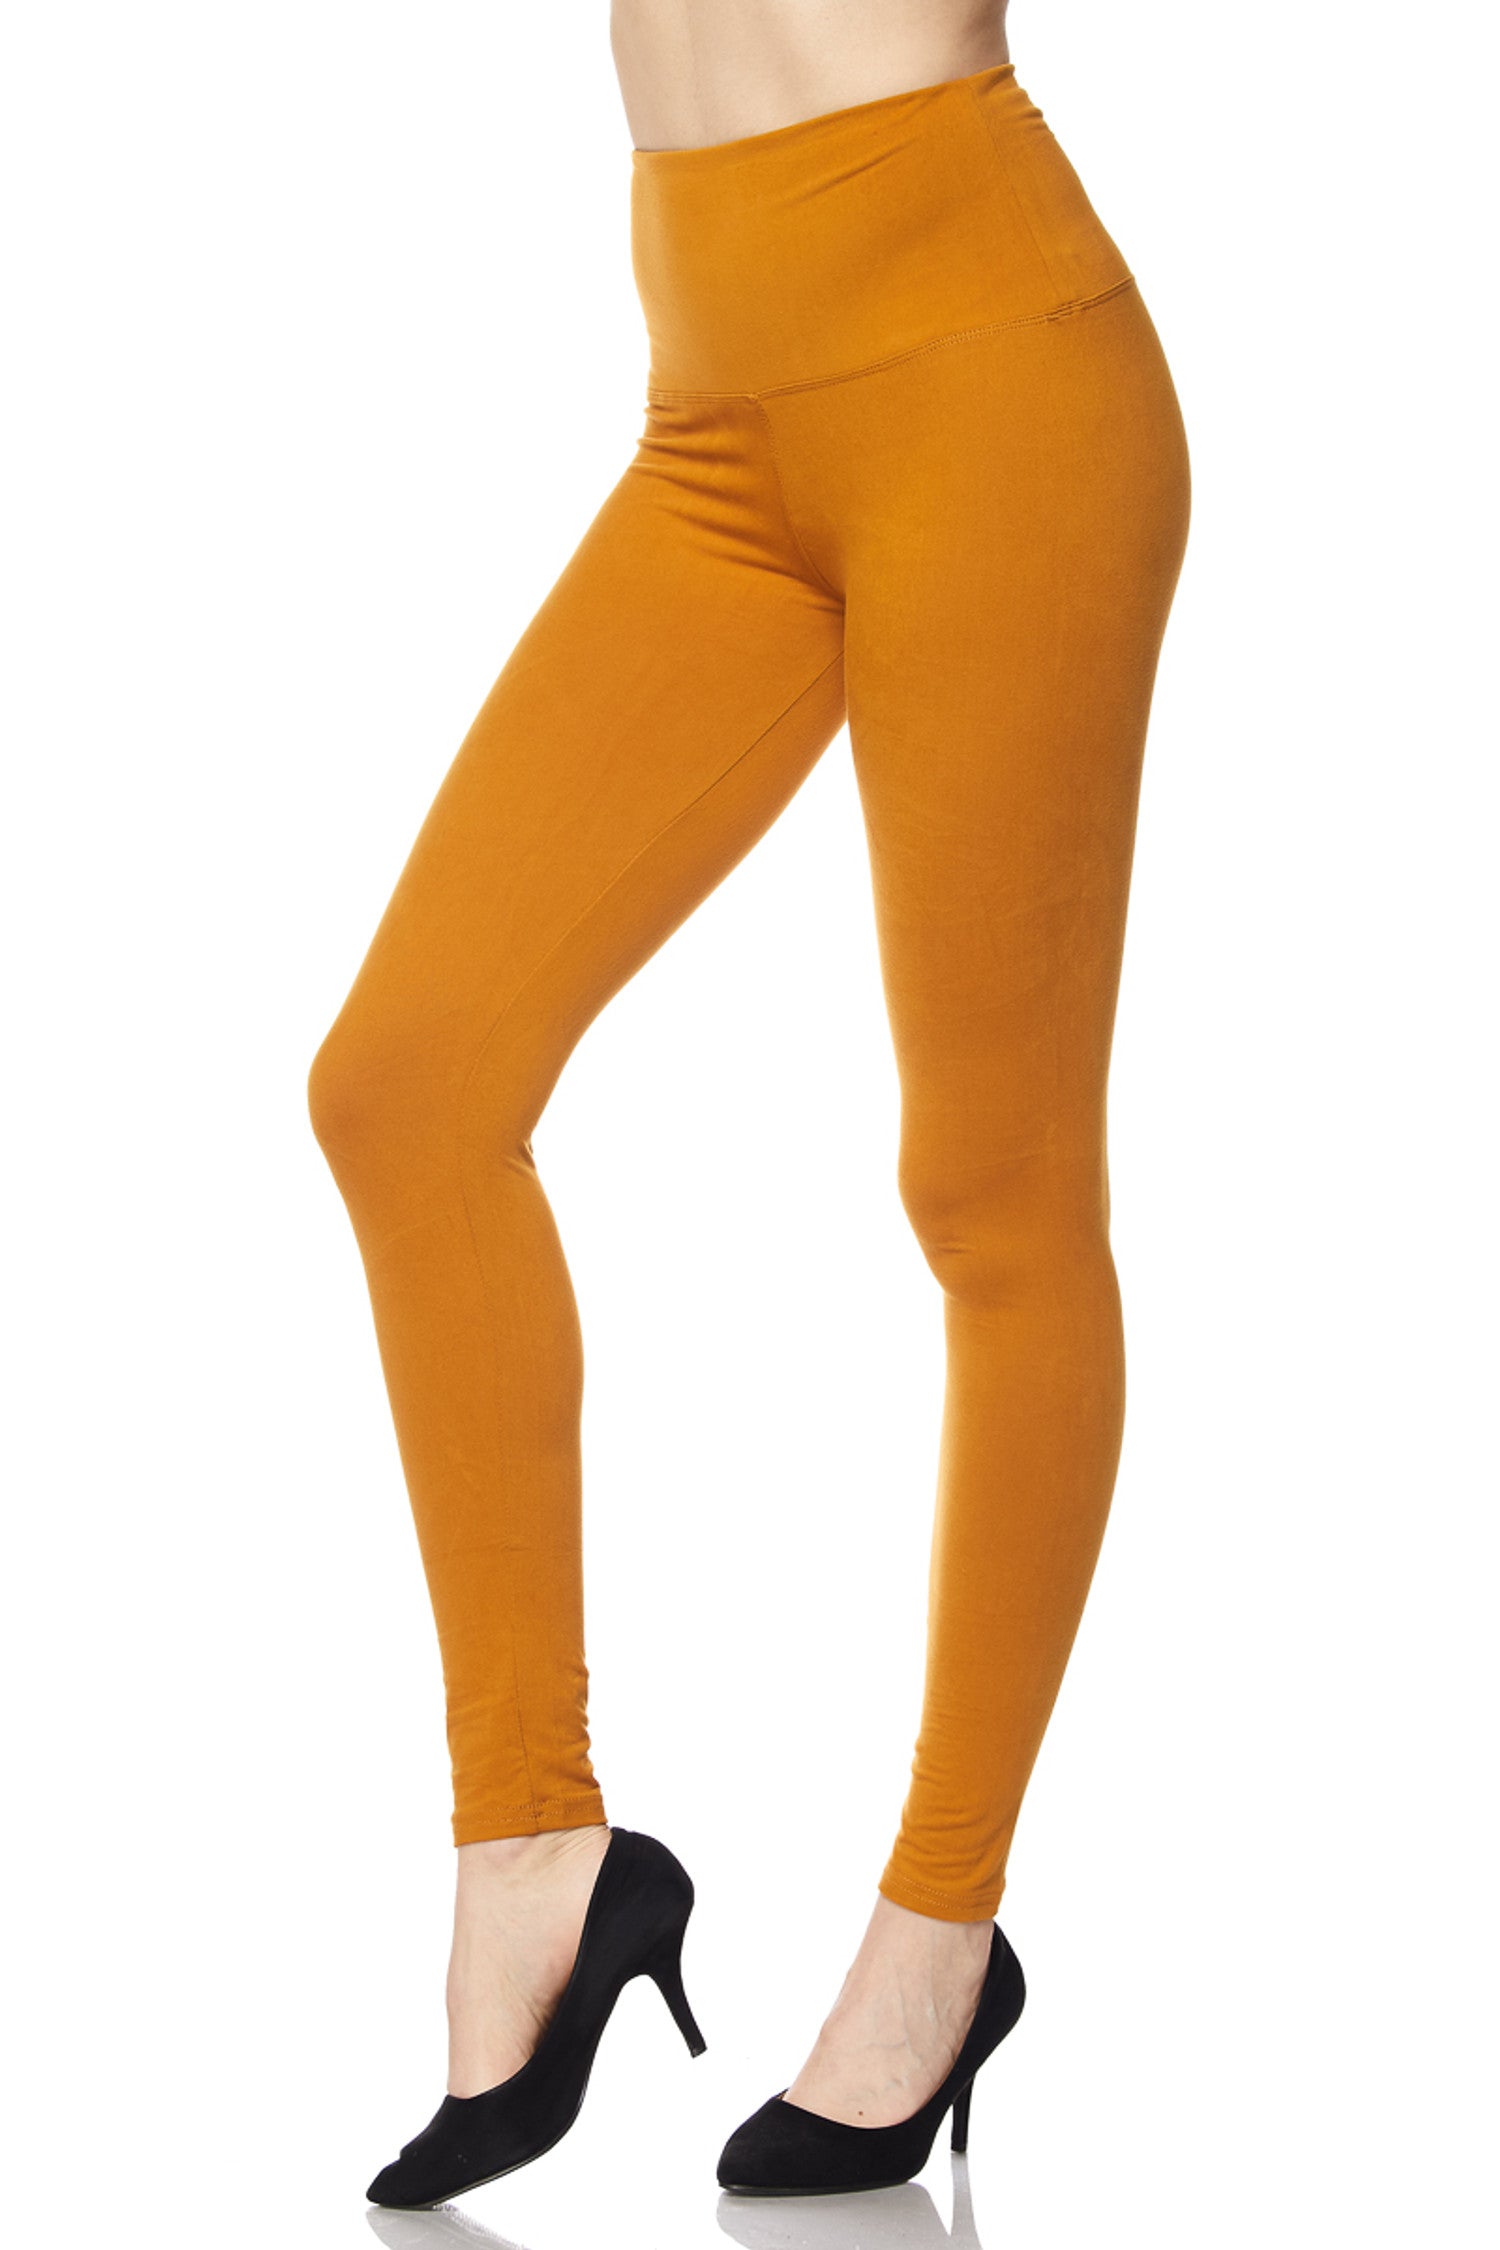 Buttery Soft Basic Solid One Size Leggings - Nex Mix